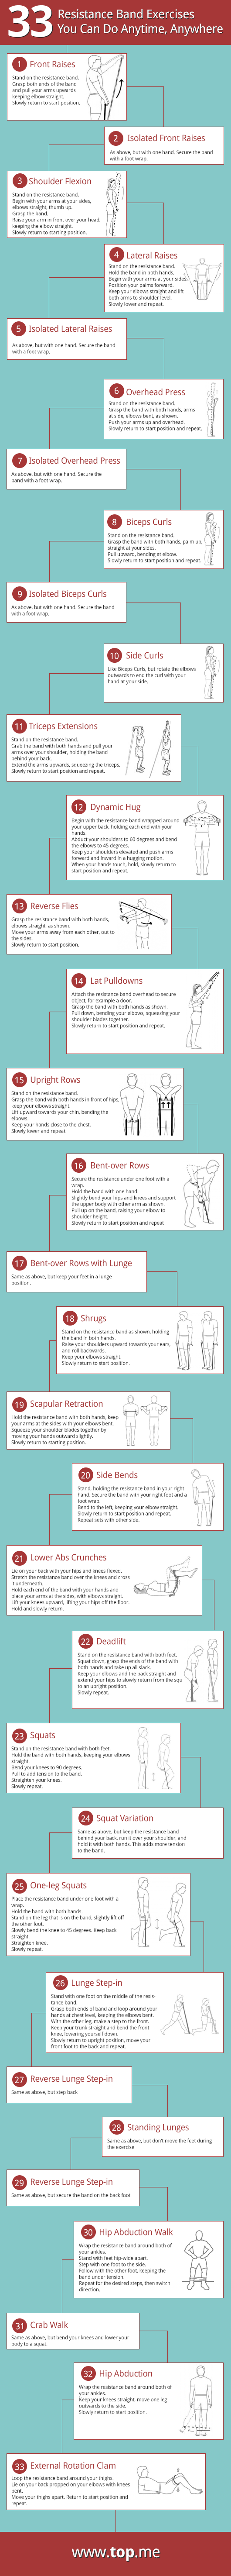 Infographic of 33 resistance band exercises 